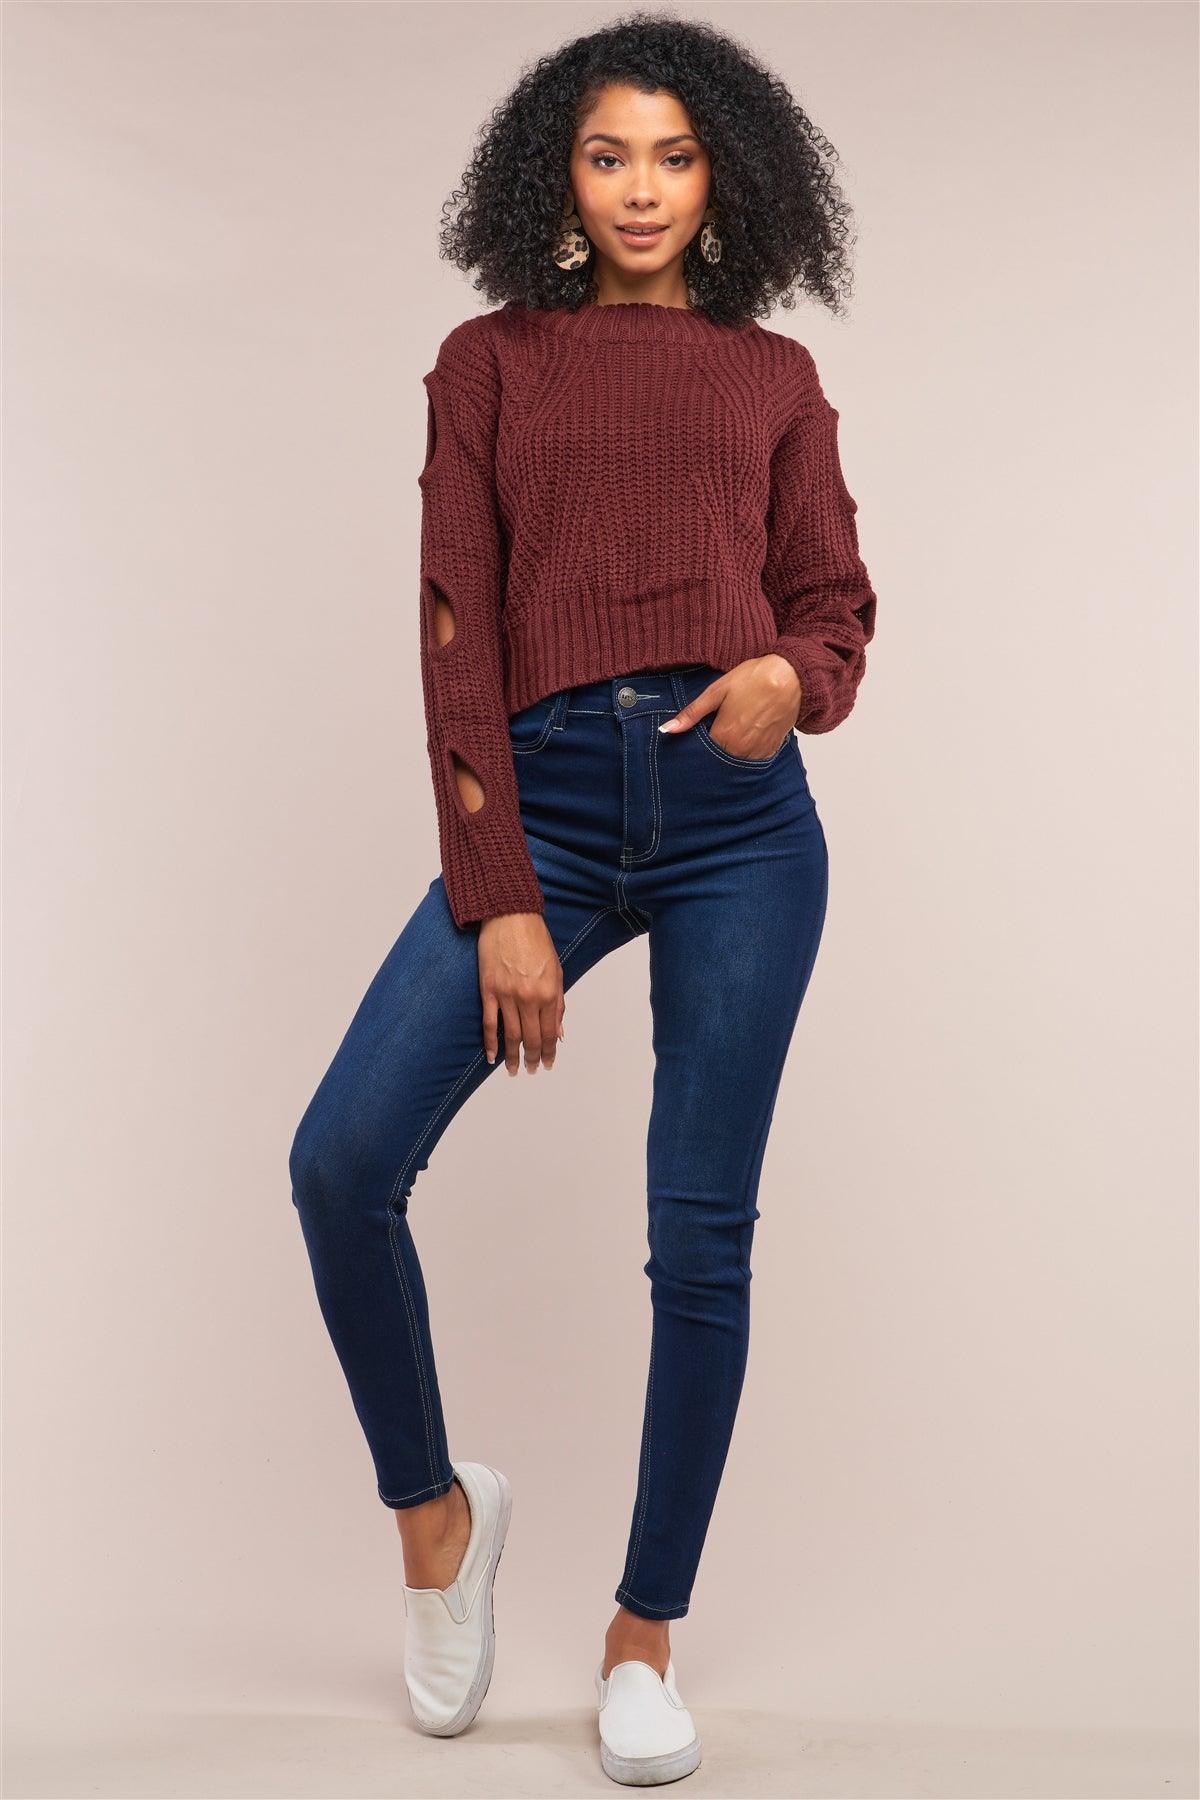 Wine Round Neck Long Cut-Out Detail Sleeve Cable Knit Cropped Sweater